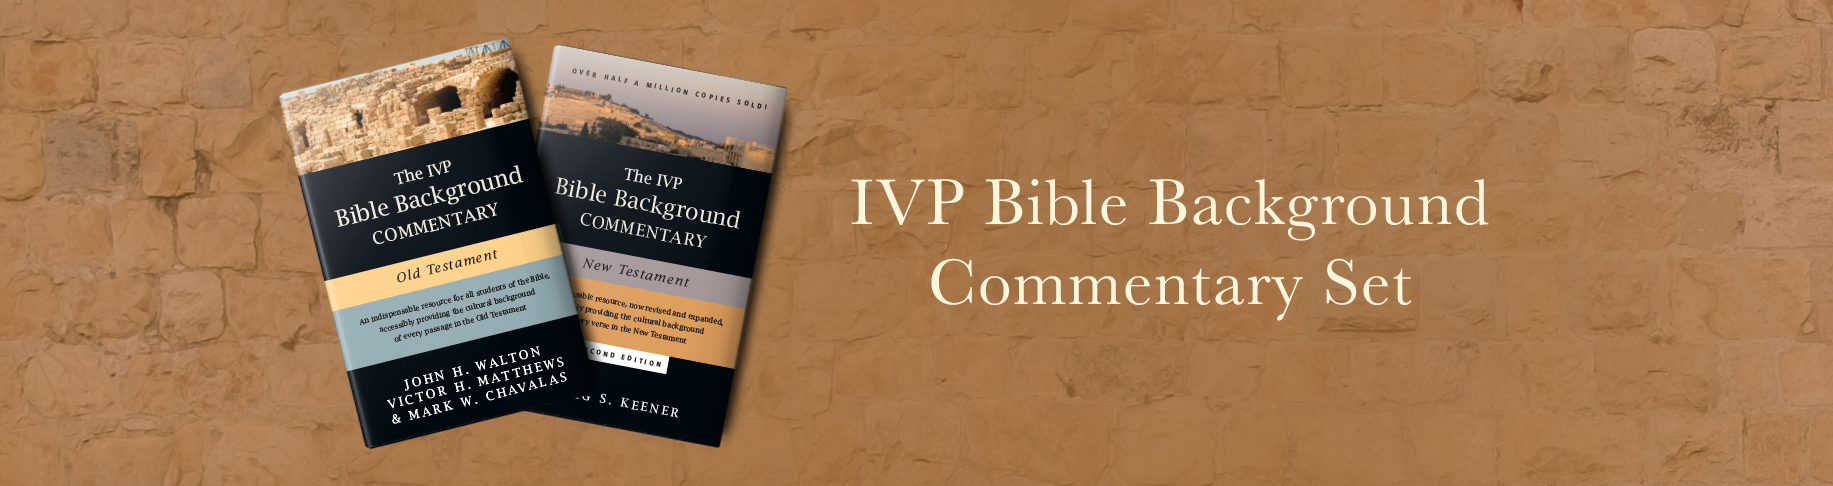 IVP Bible Background Commentary Set